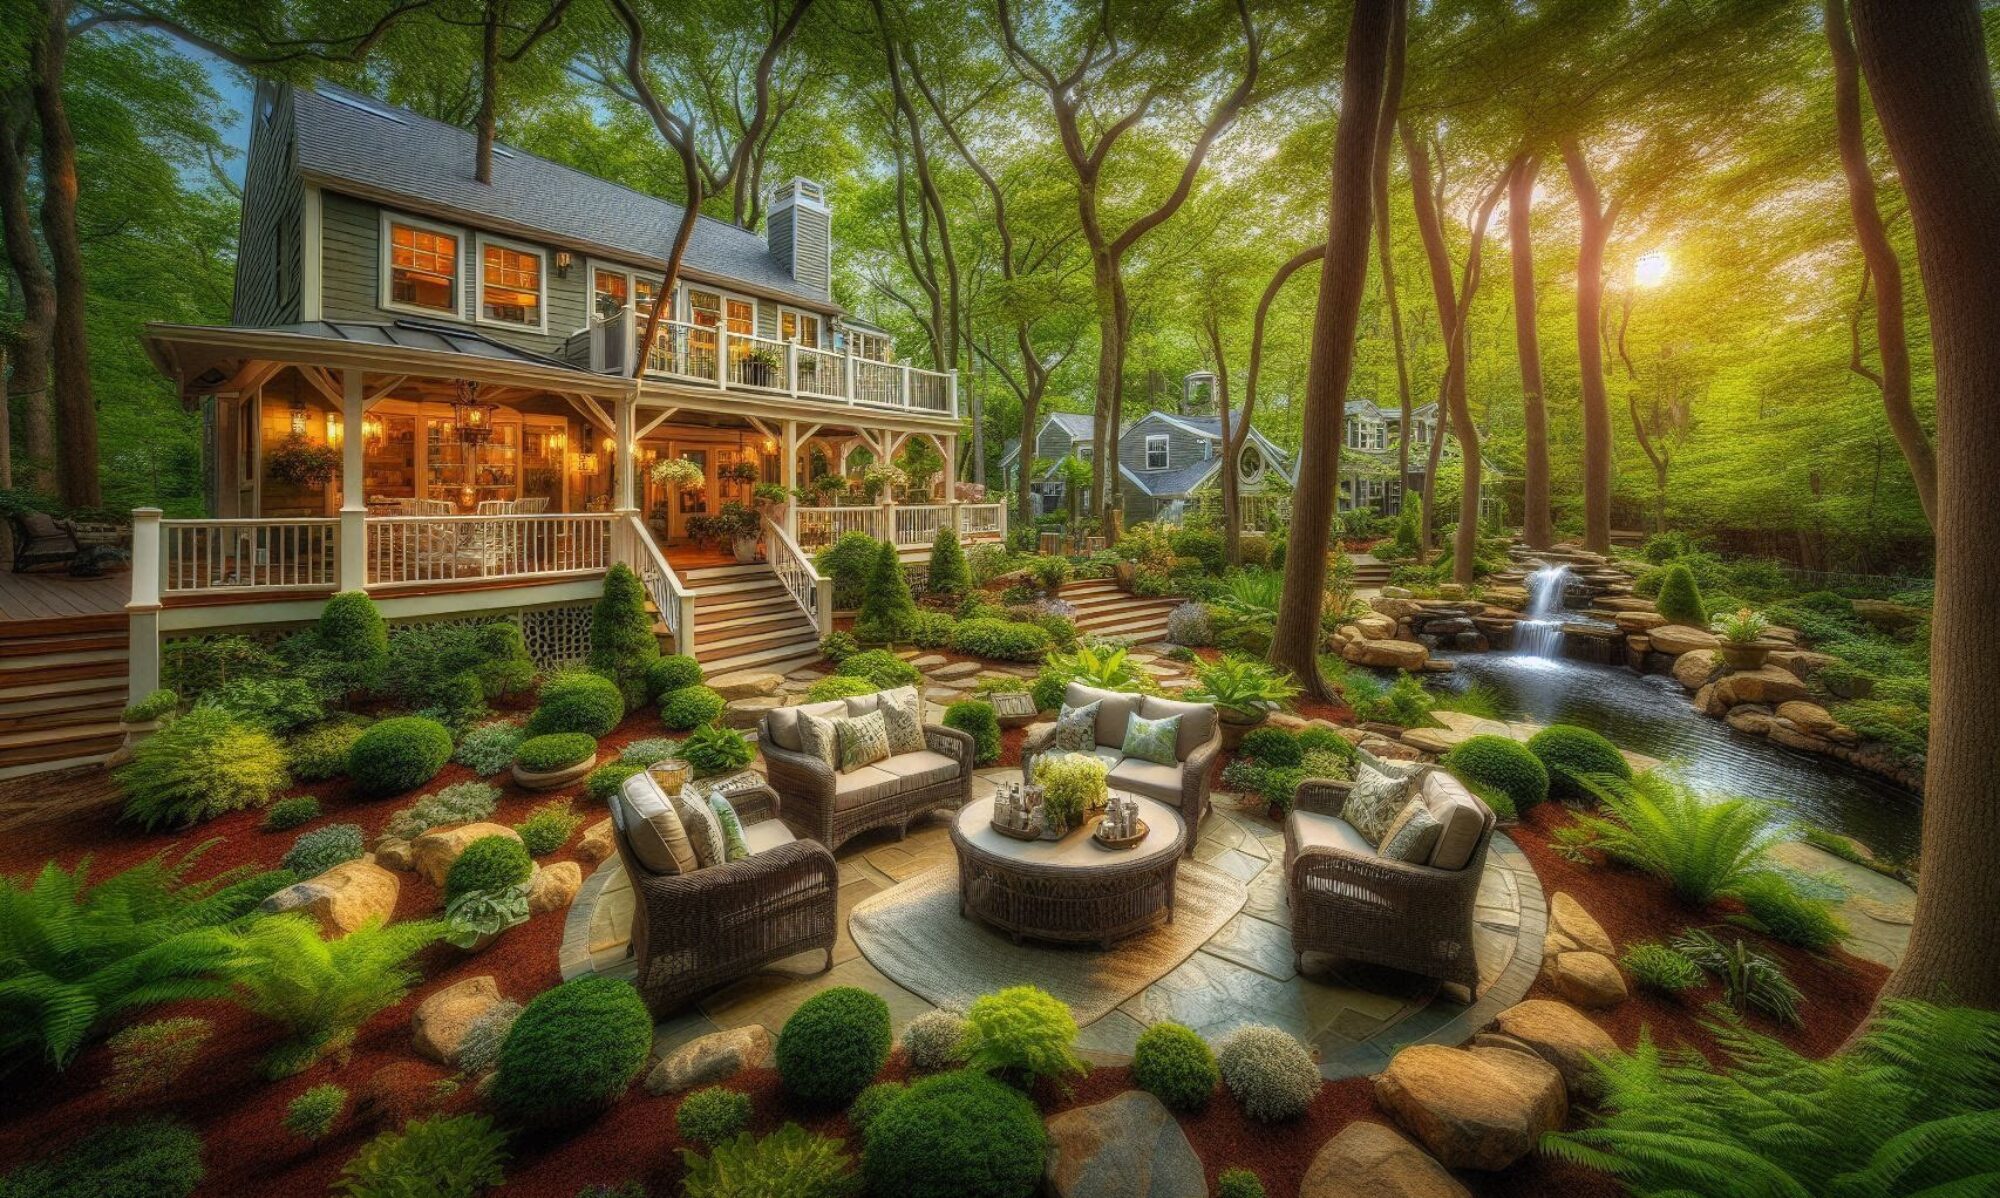 Backyard oasis of a home - This image created for Scena Home Staging by AI